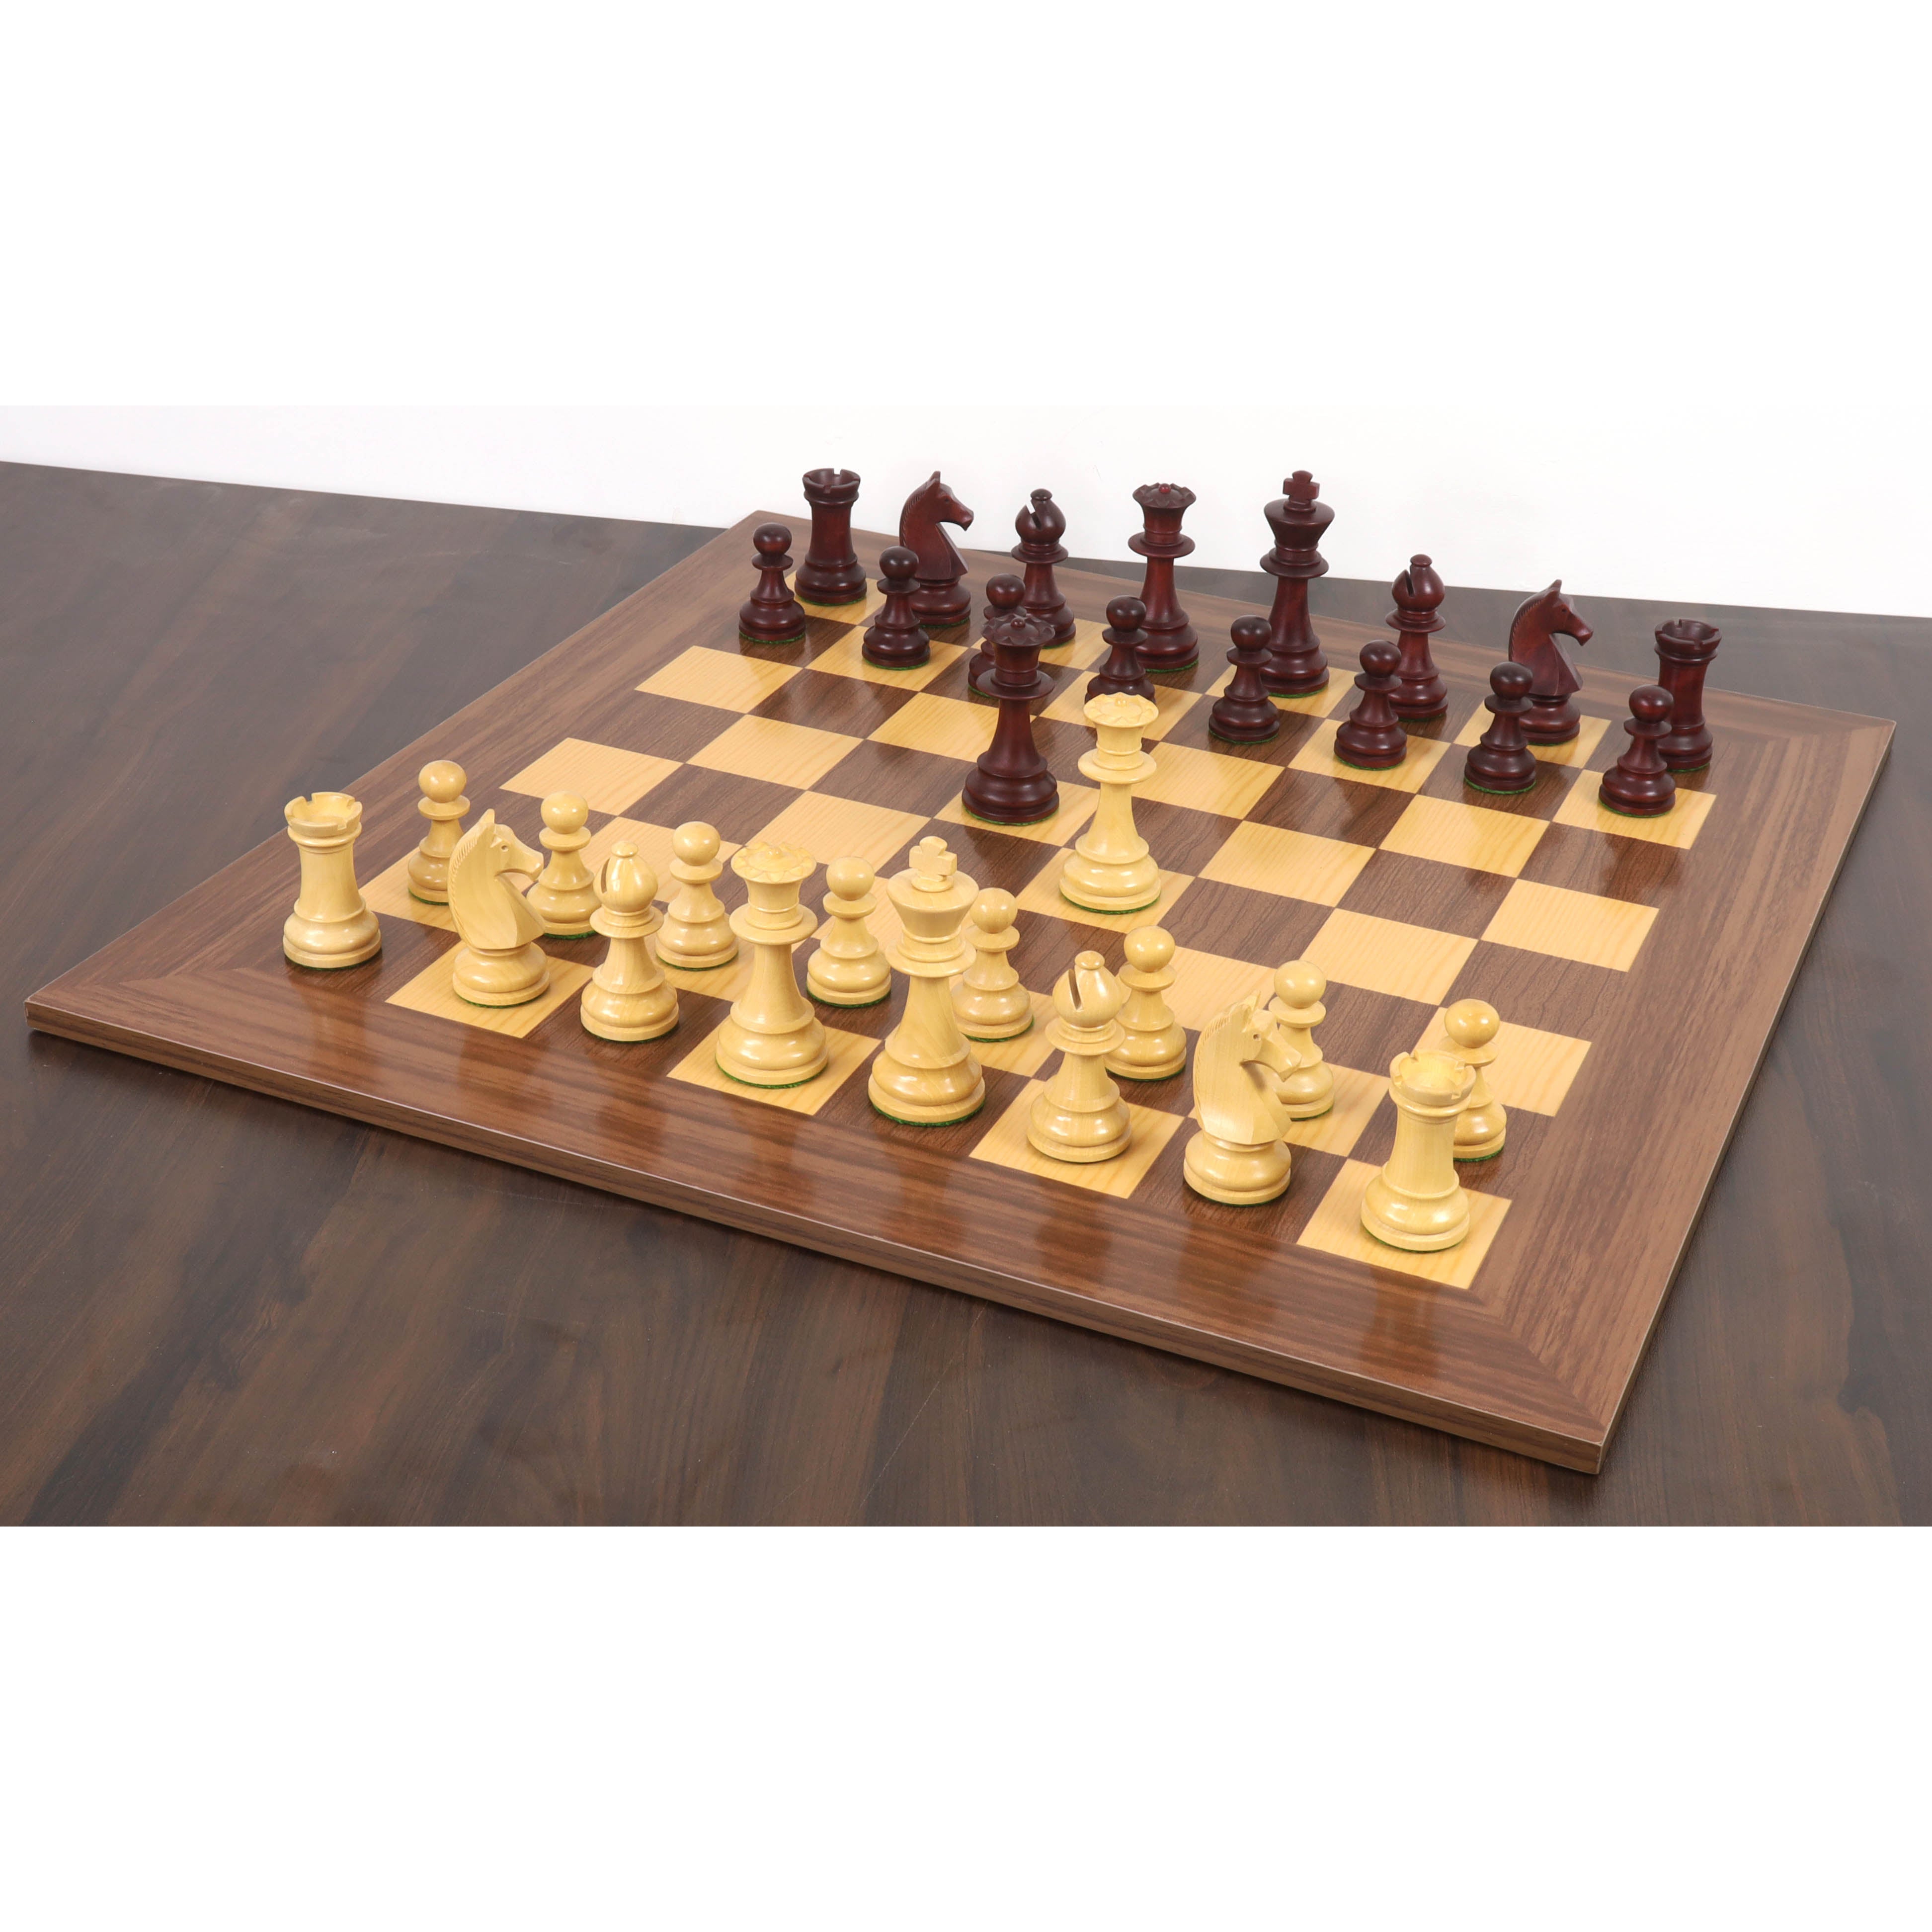 Slightly Imperfect 3.9" French Chavet Tournament Chess Pieces Only Set - Mahogany Stained & Boxwood